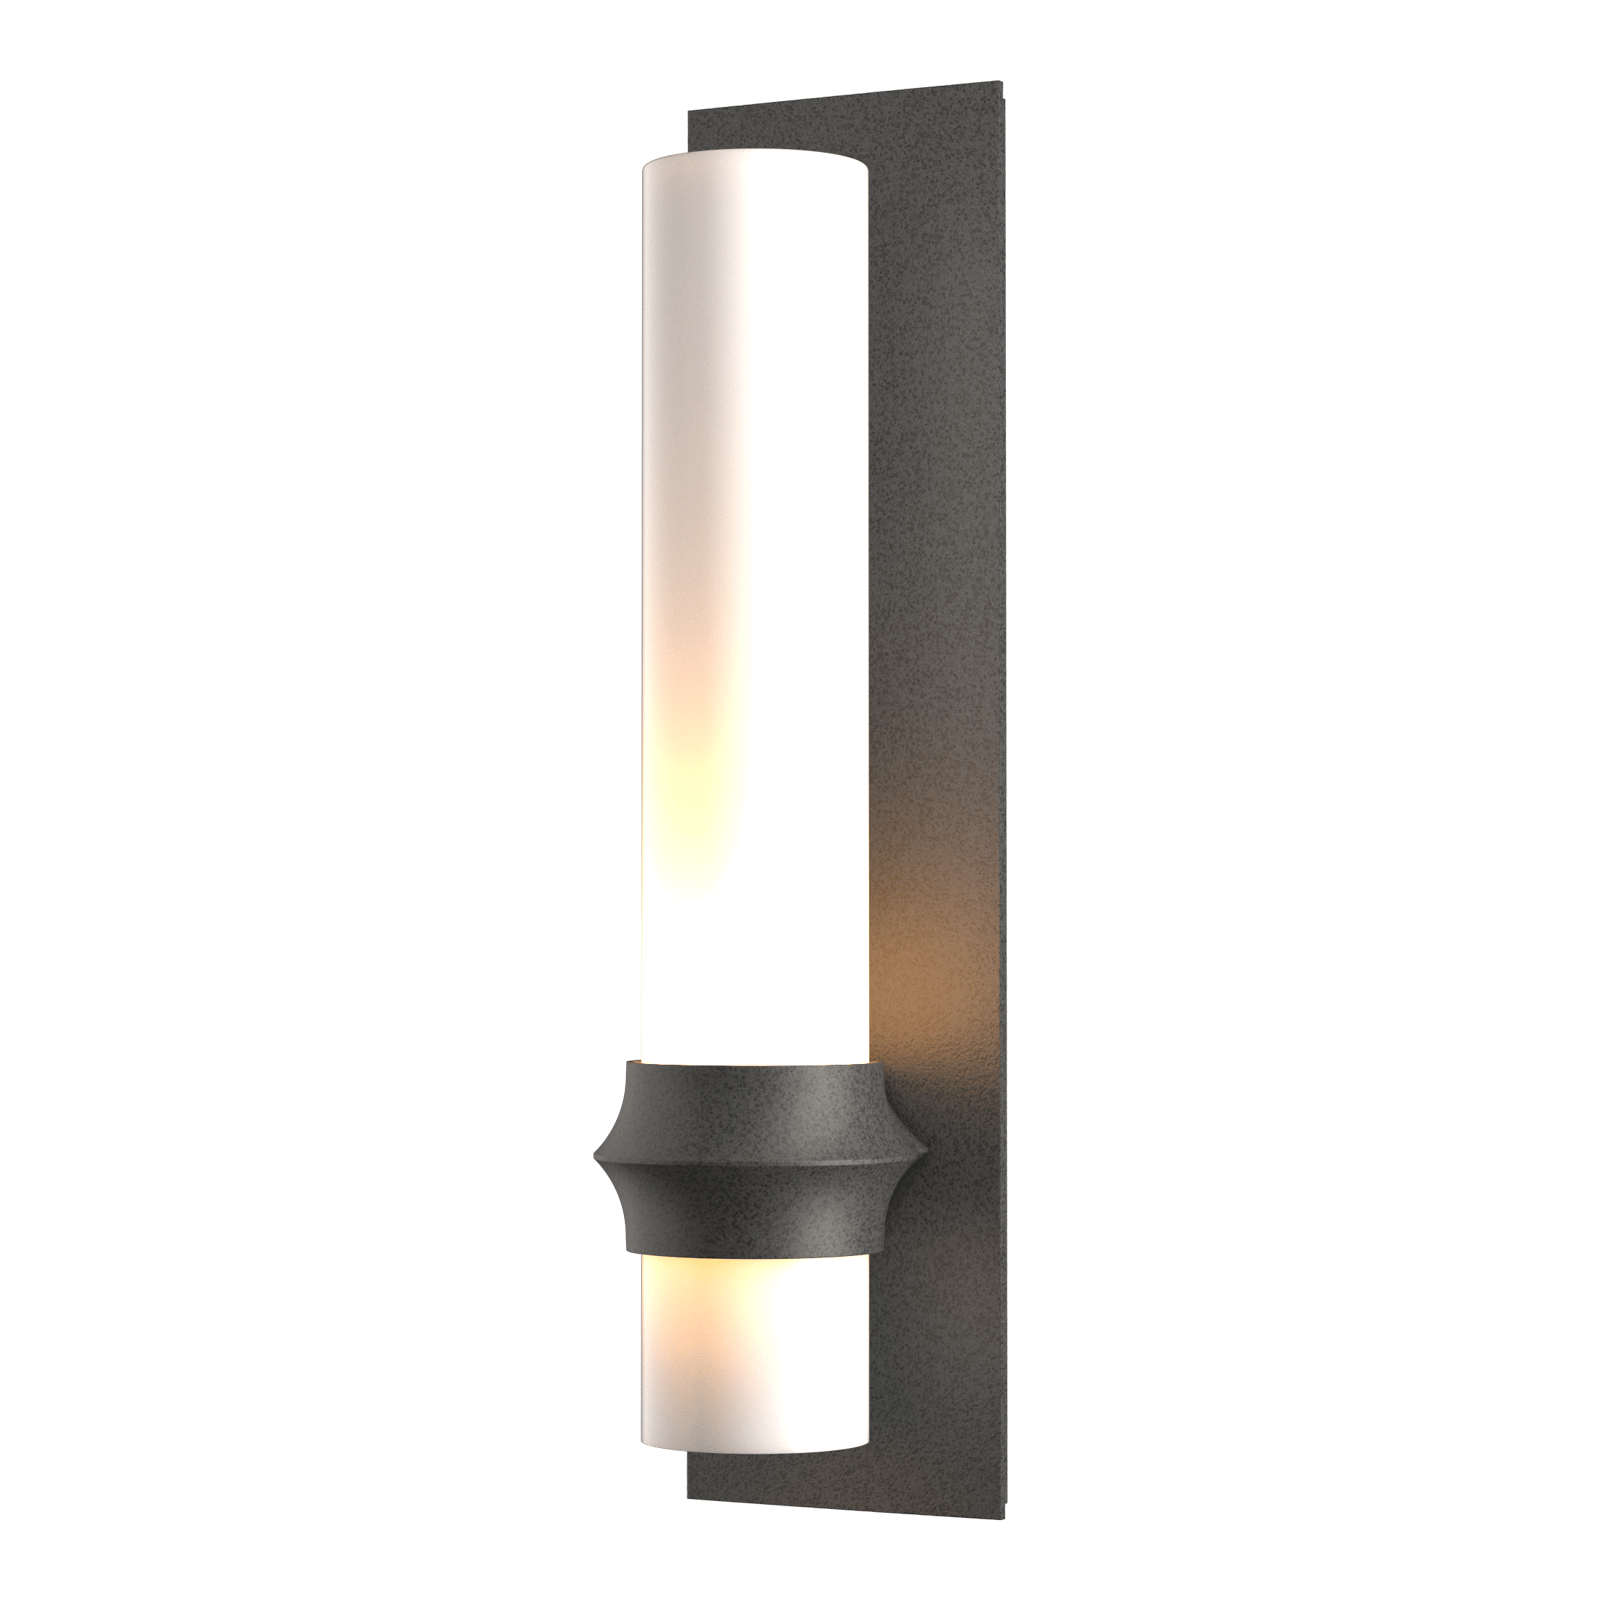 Hubbardton Forge Rook Outdoor Sconce Outdoor l Wall Hubbardton Forge Coastal Natural Iron  